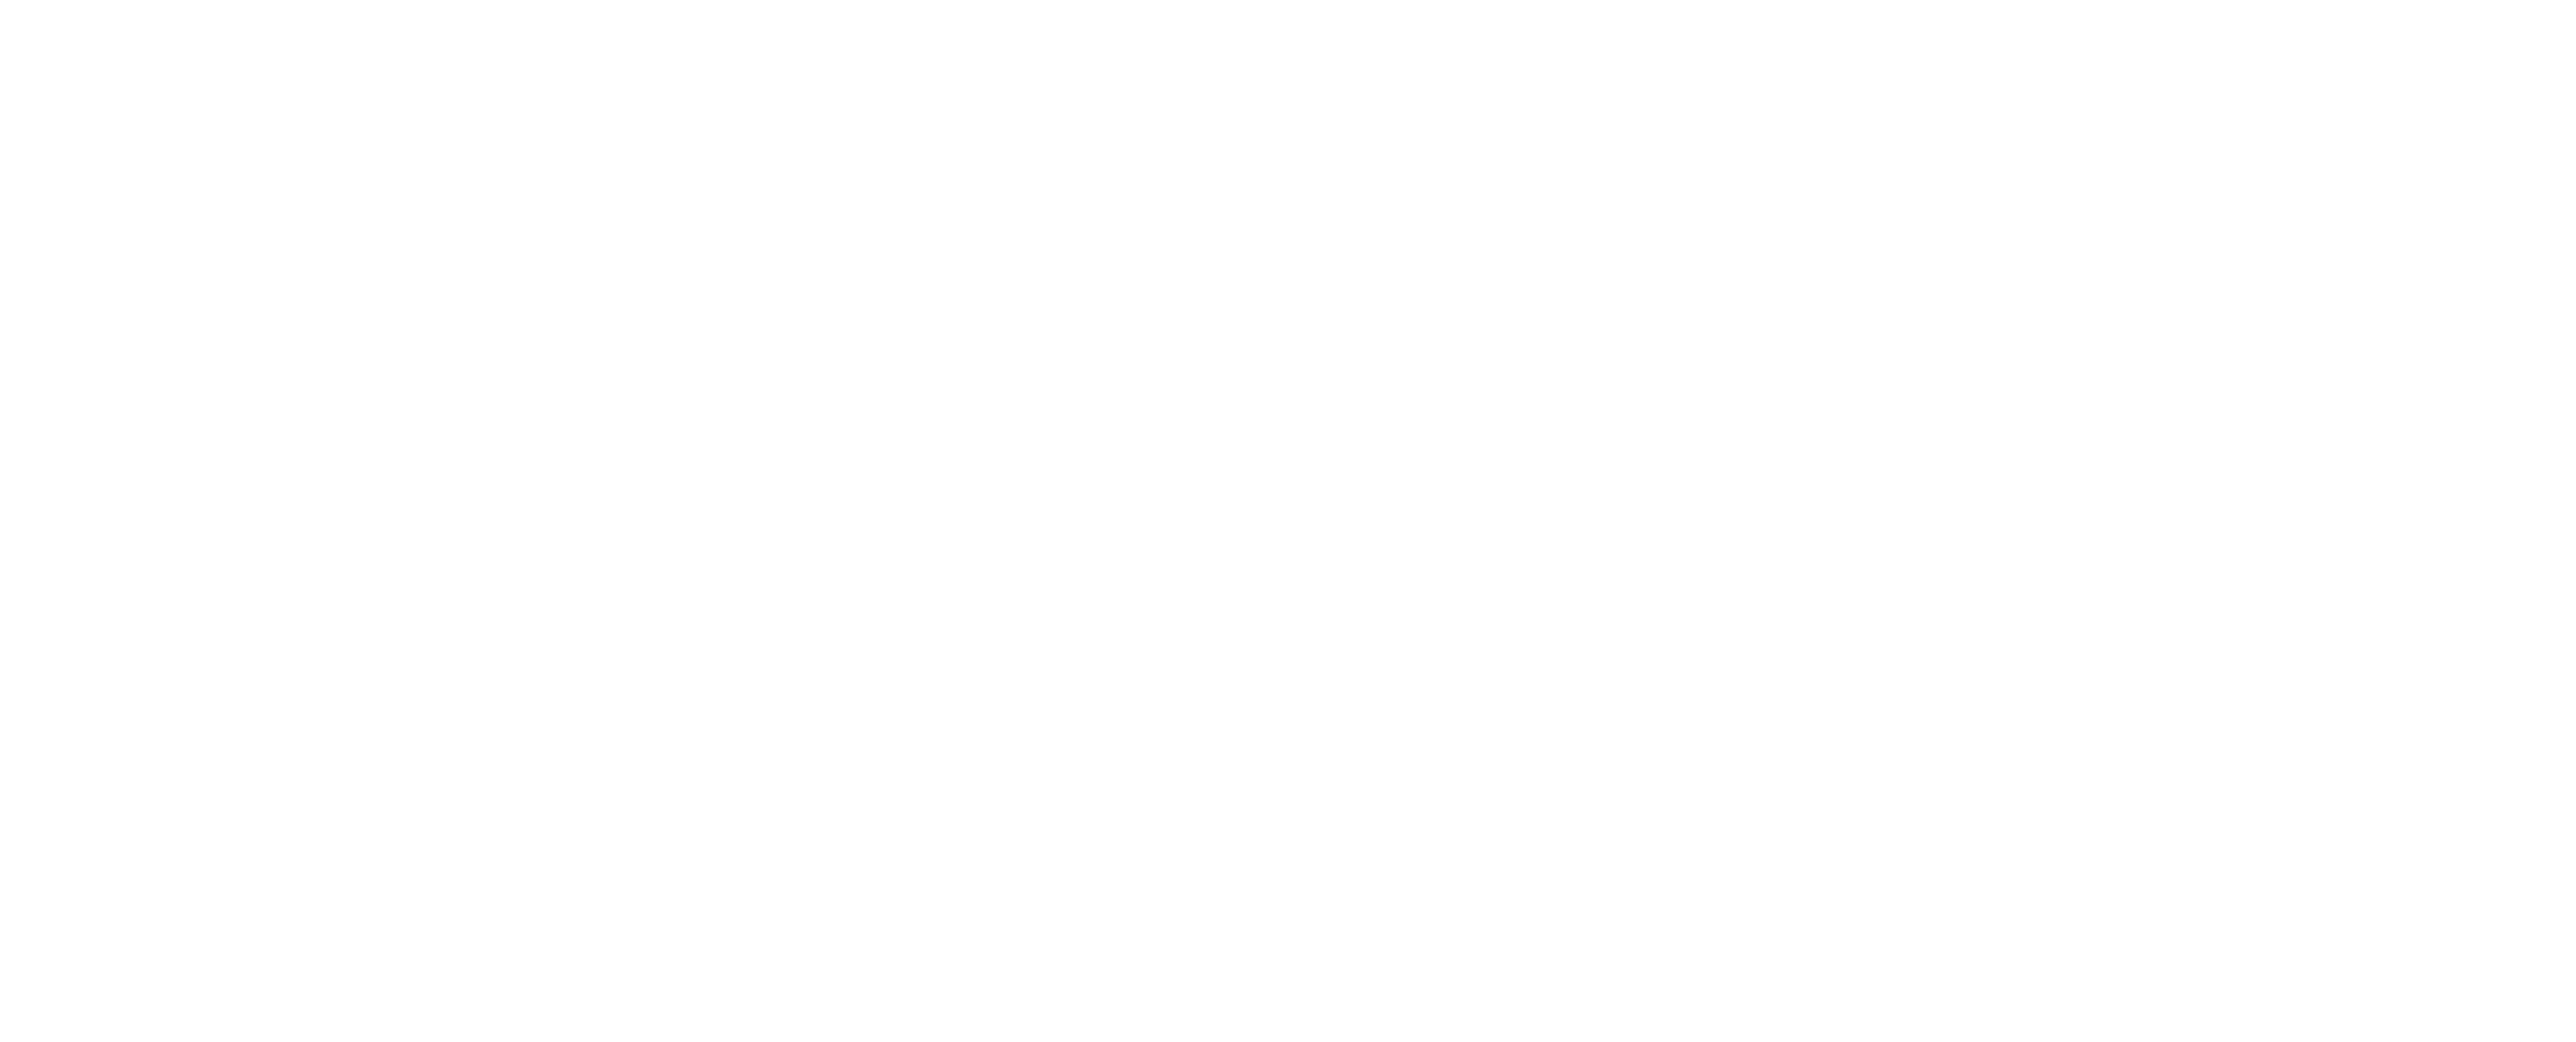 Intent Market Research